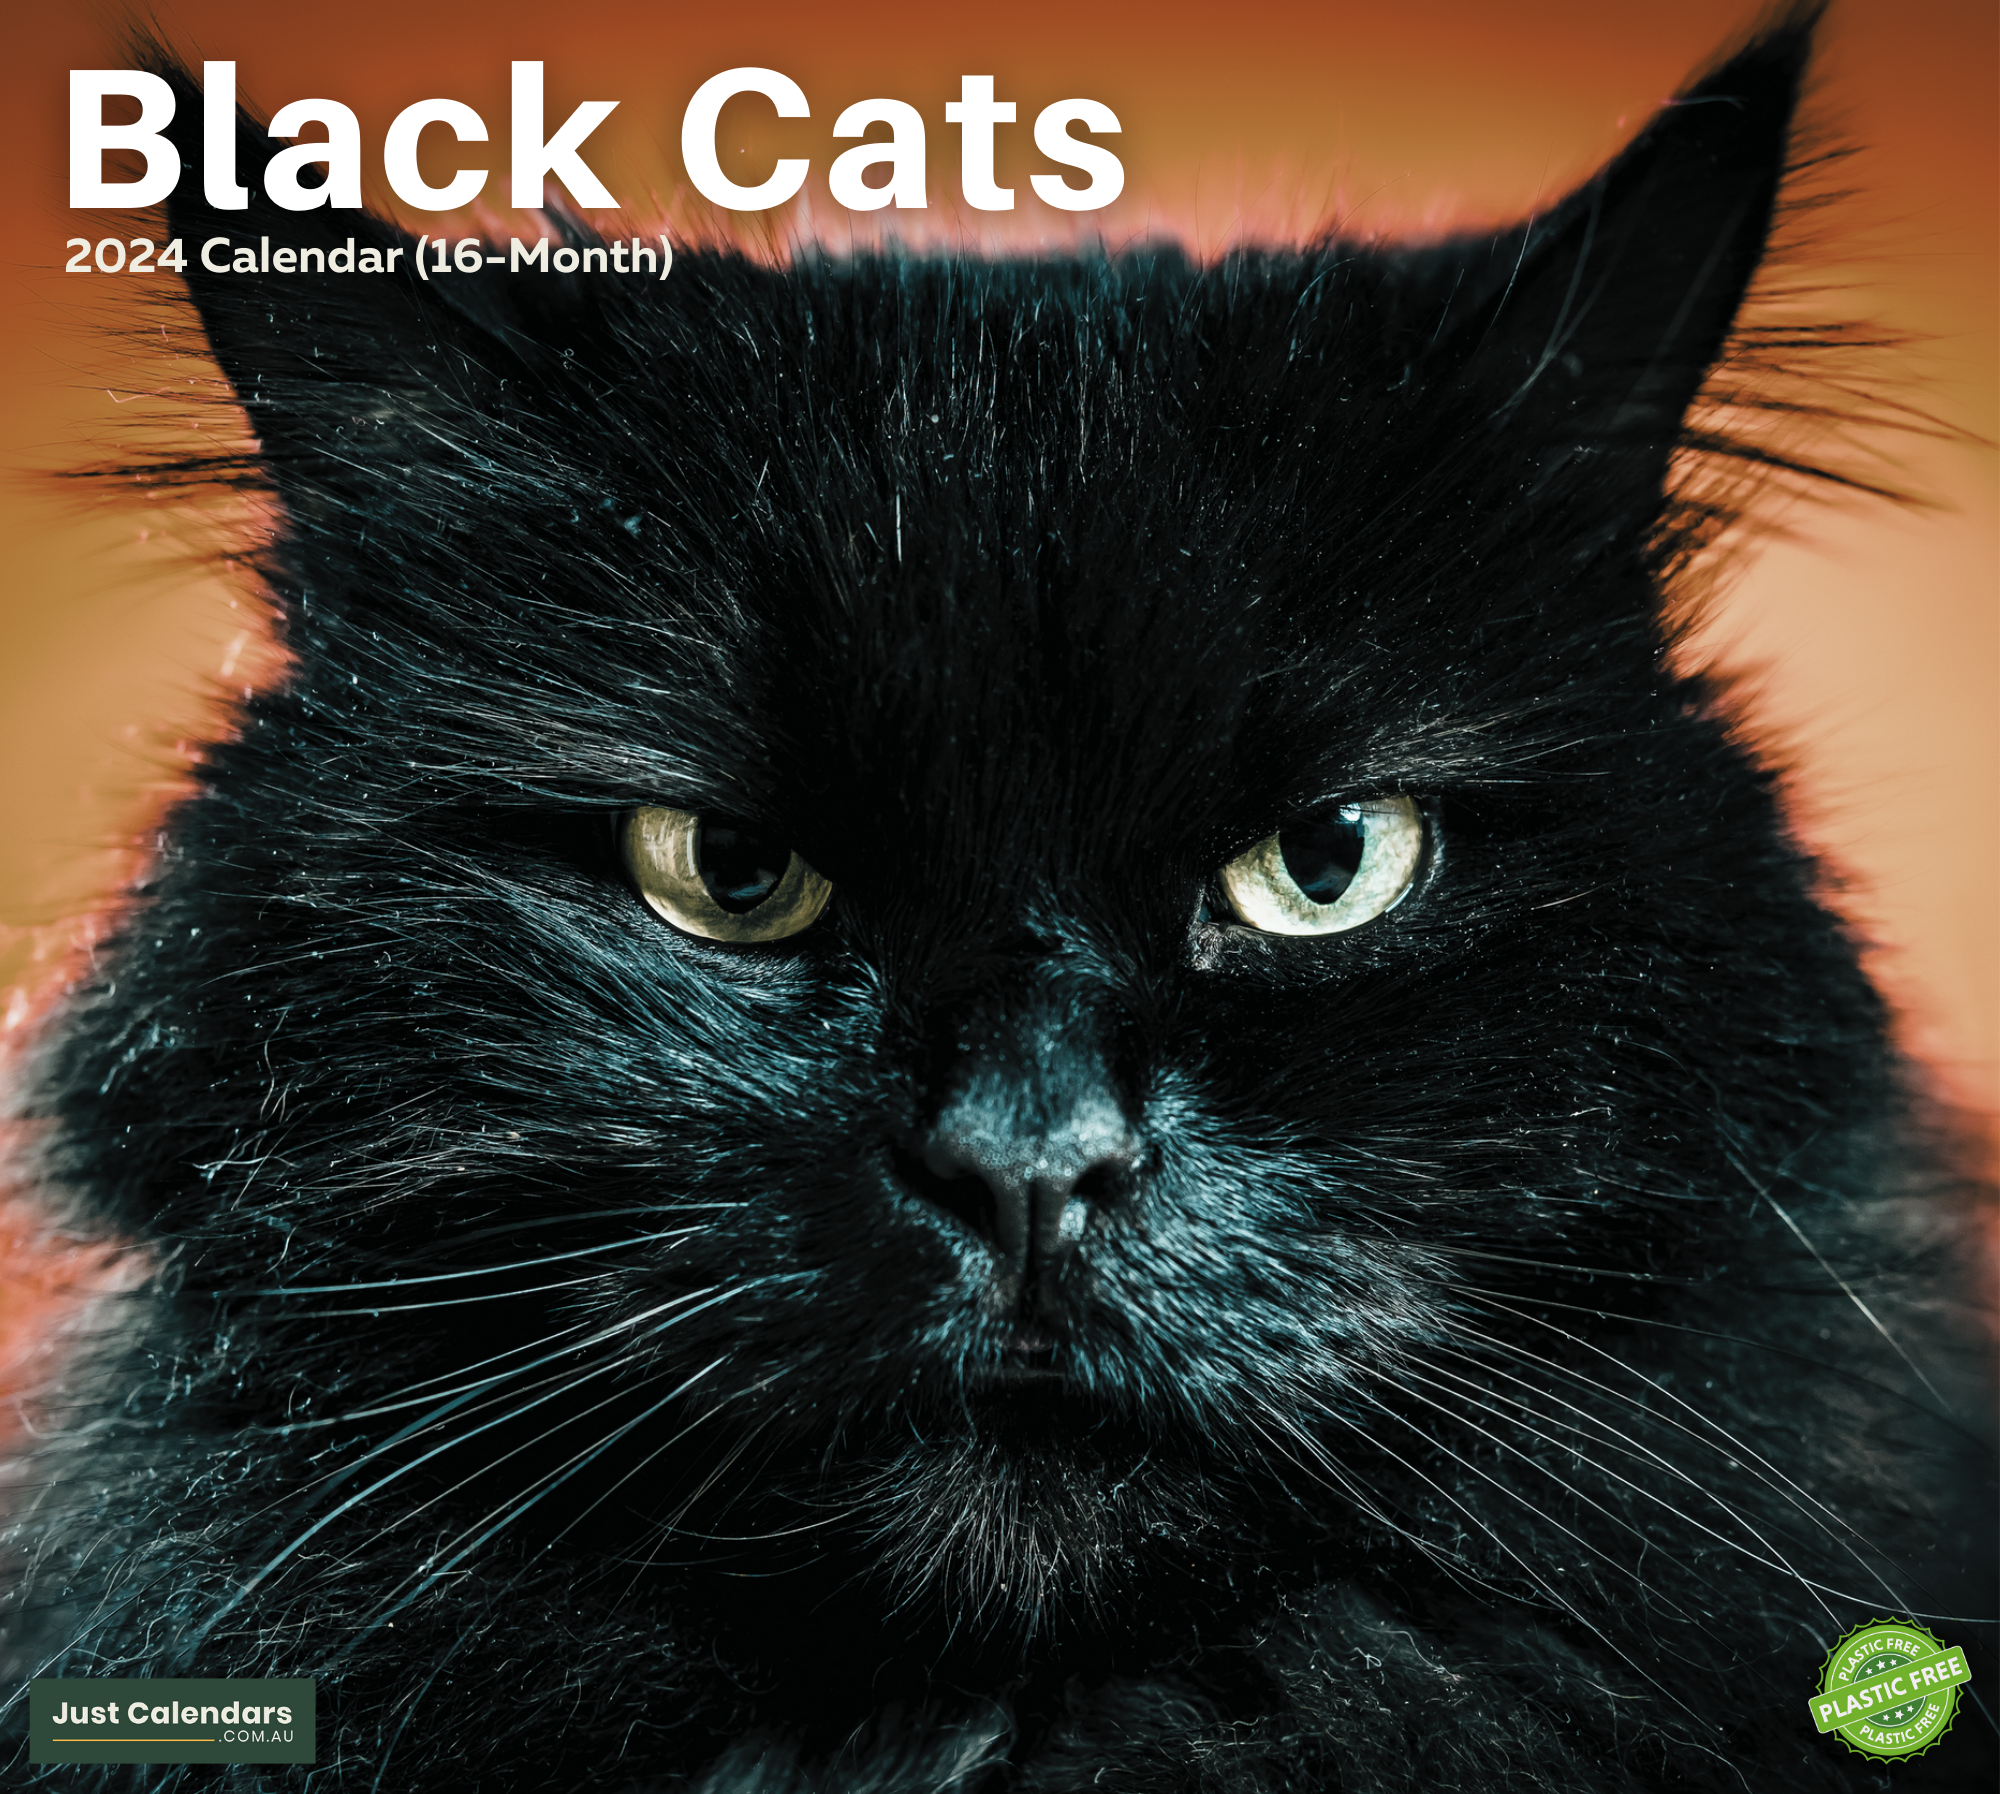 2024 Black Cats & Kittens - Deluxe Wall Calendar by Just Calendars - 16 Month - Plastic Free